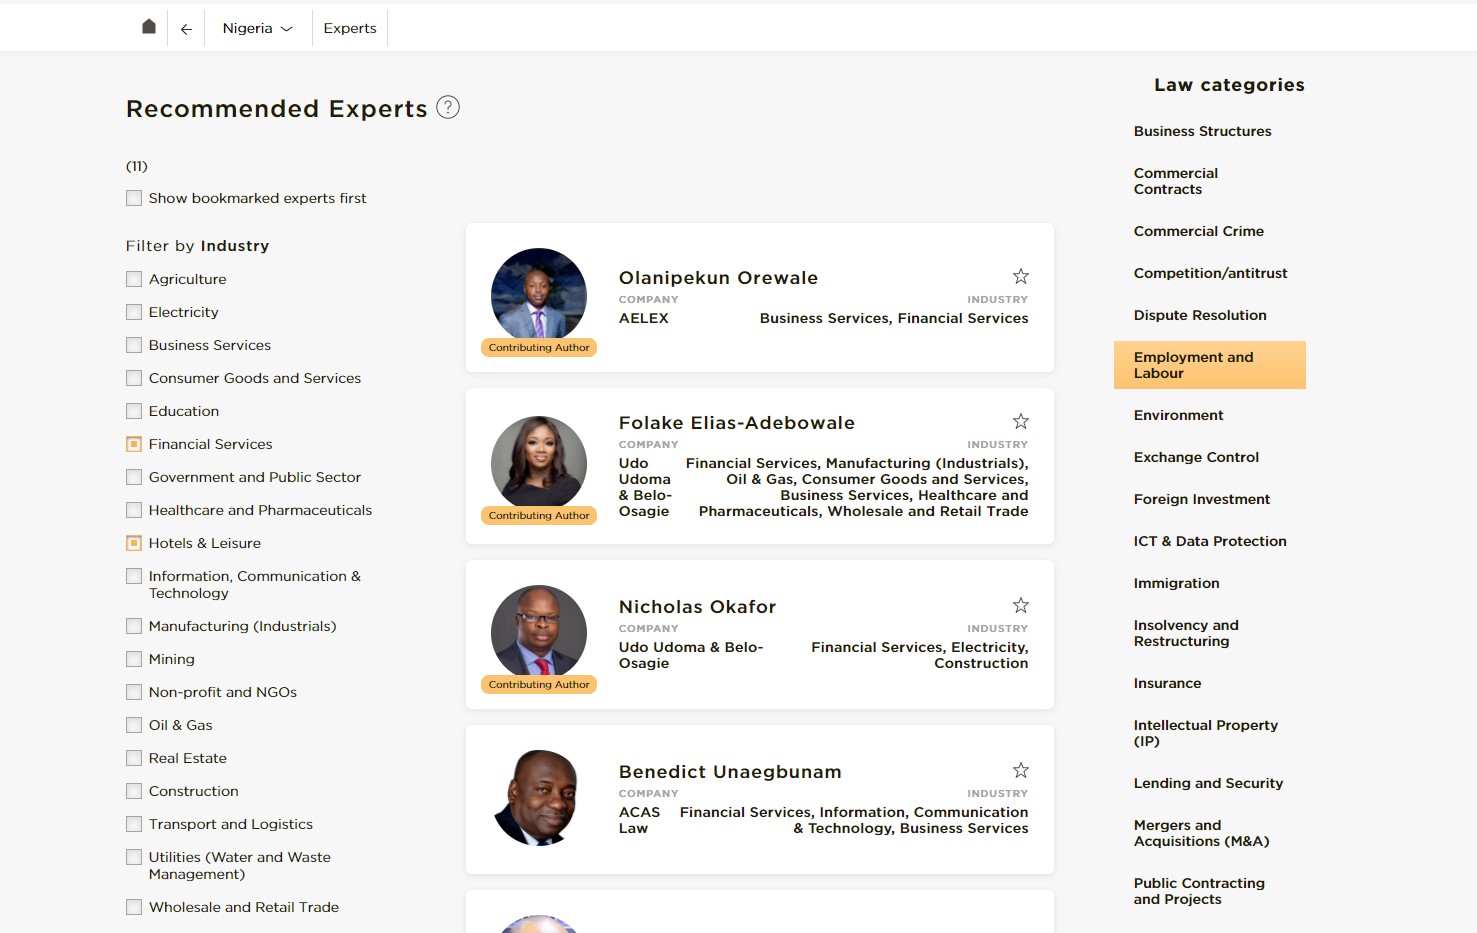 Detailed profiles of lawyers across Africa